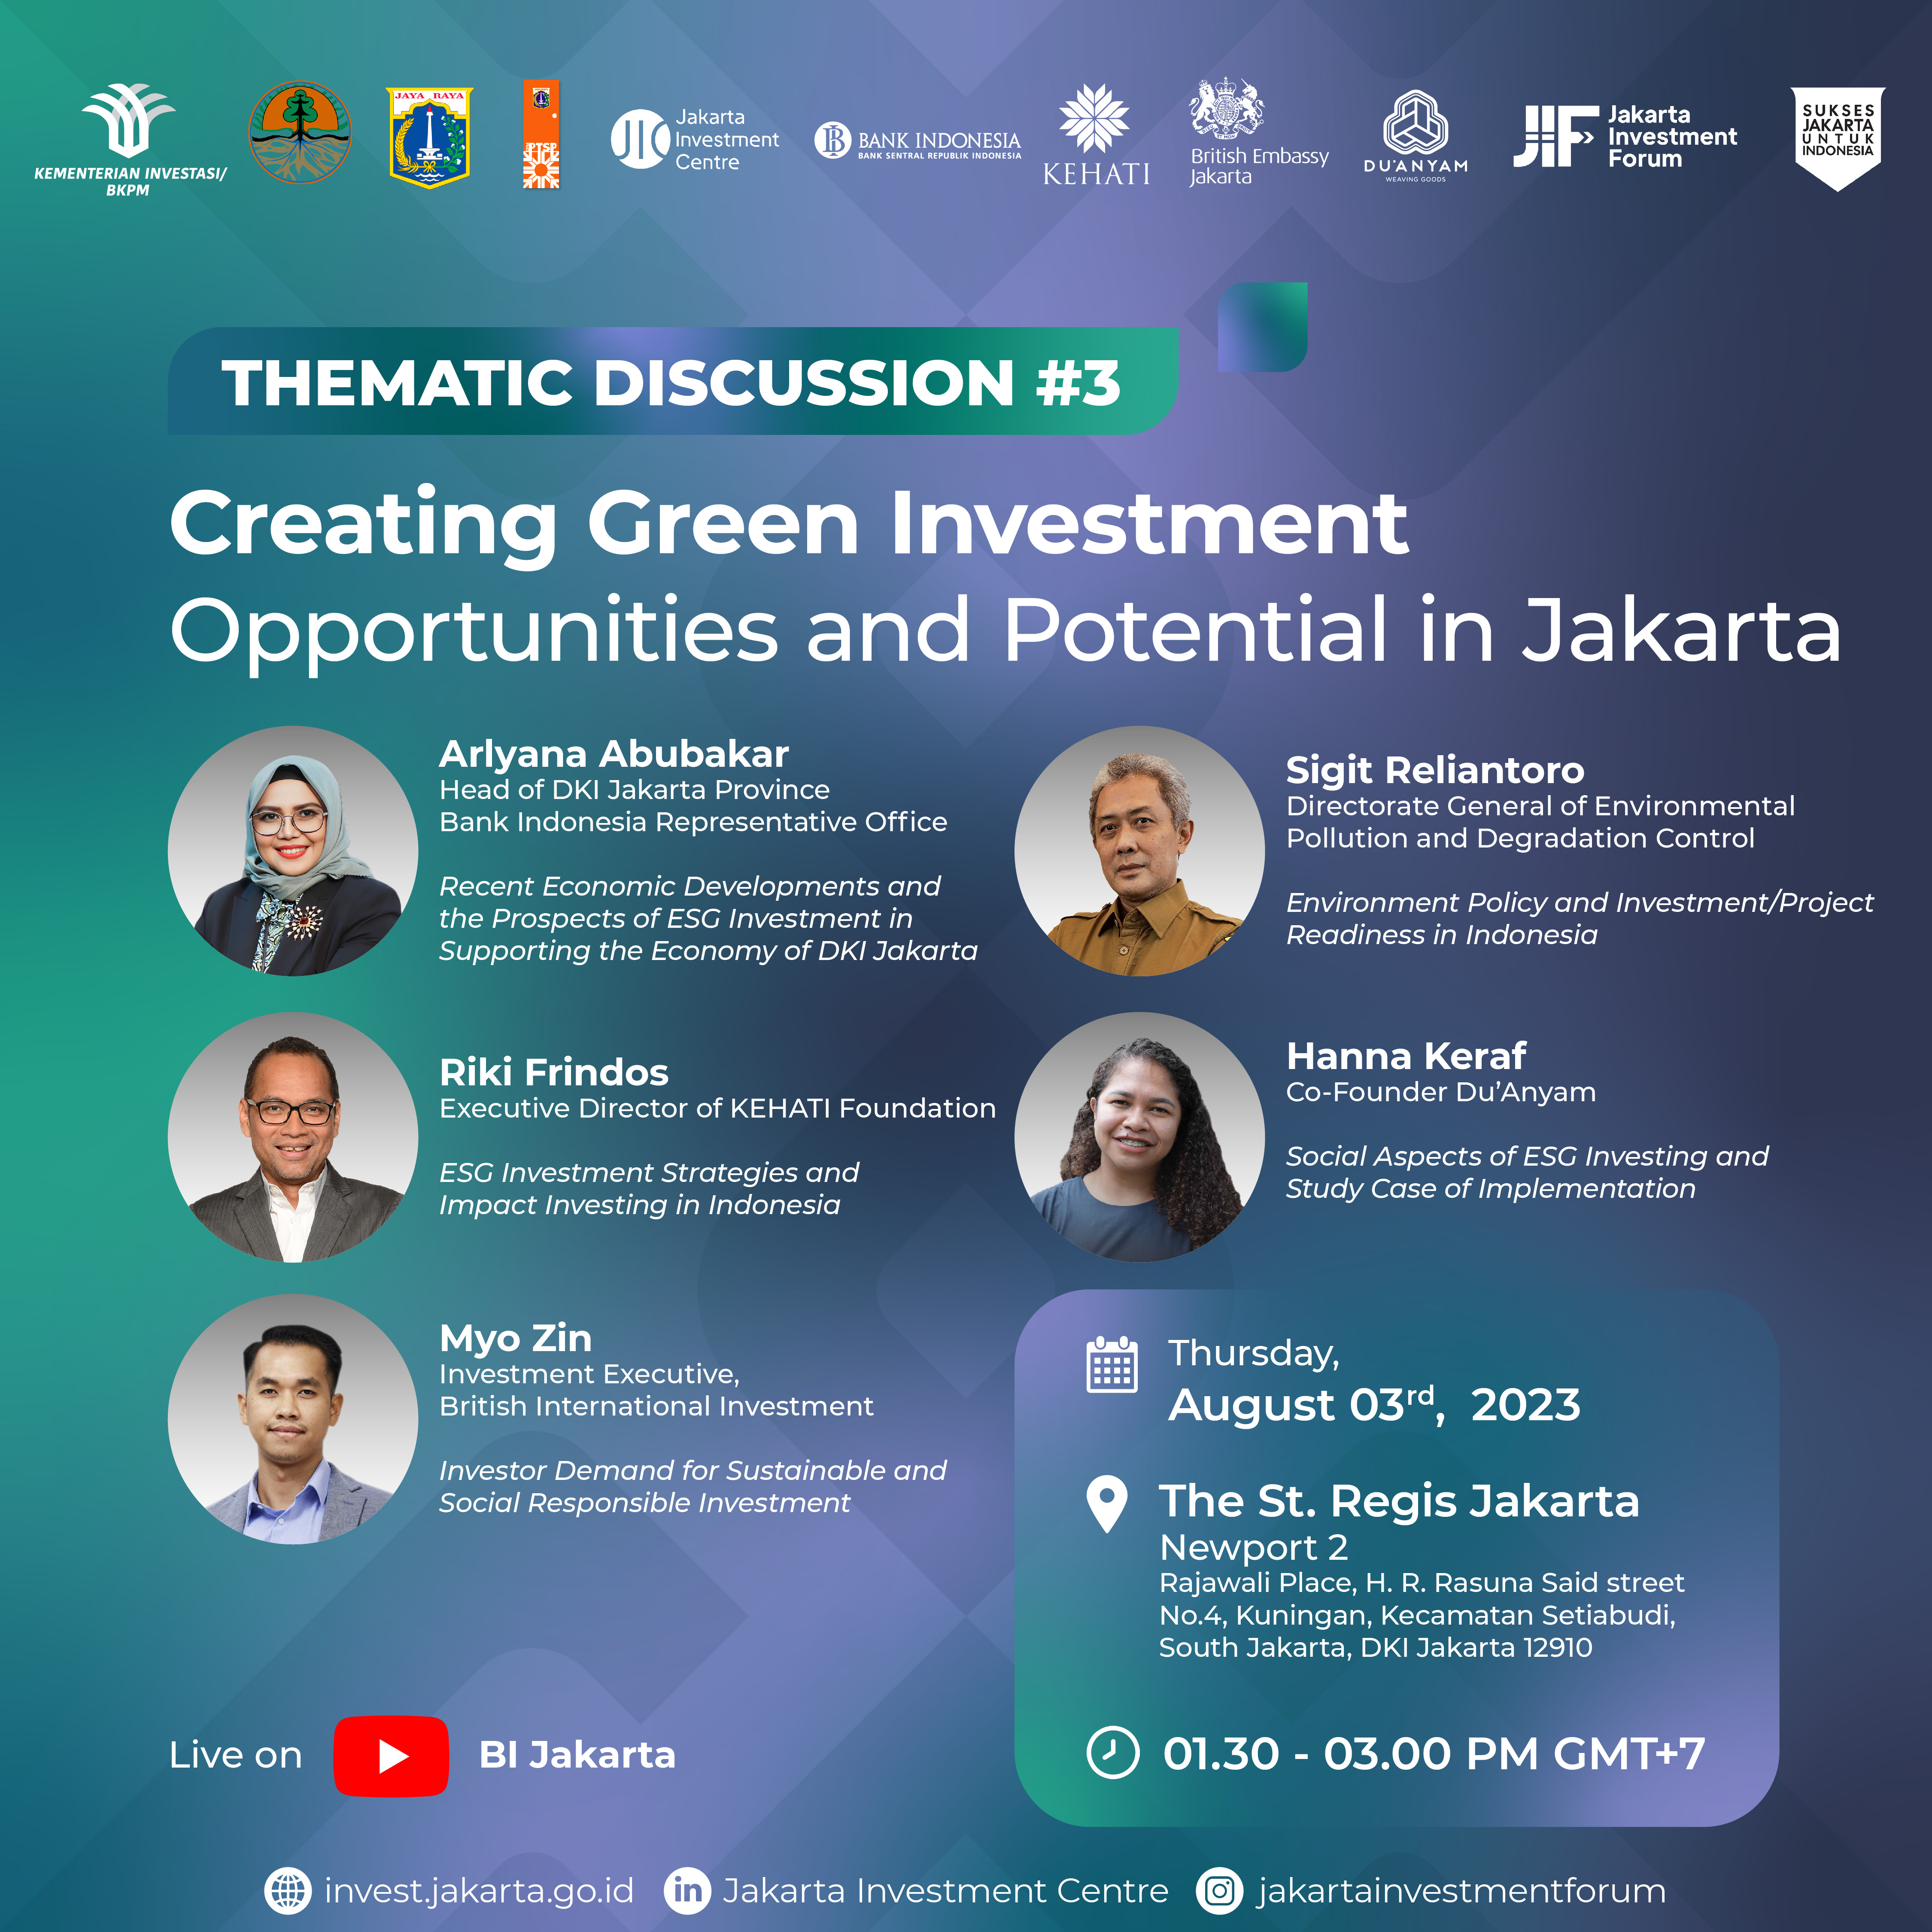 Thematic Discussion #3 - Creating Green Investment Opportunities and Potential in Jakarta